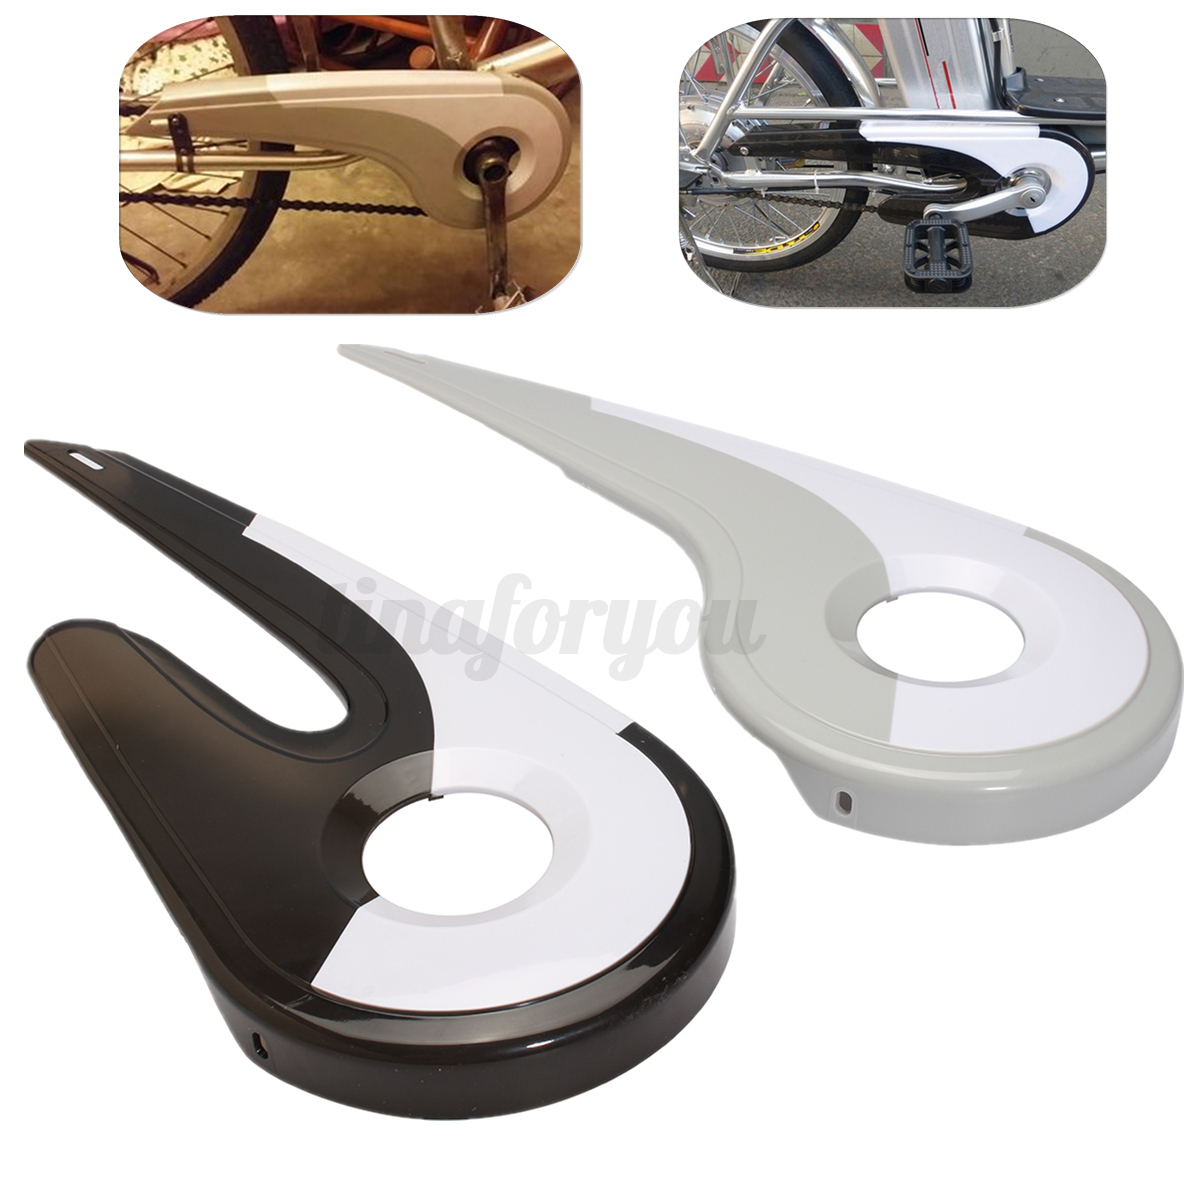 bicycle chain guard cover